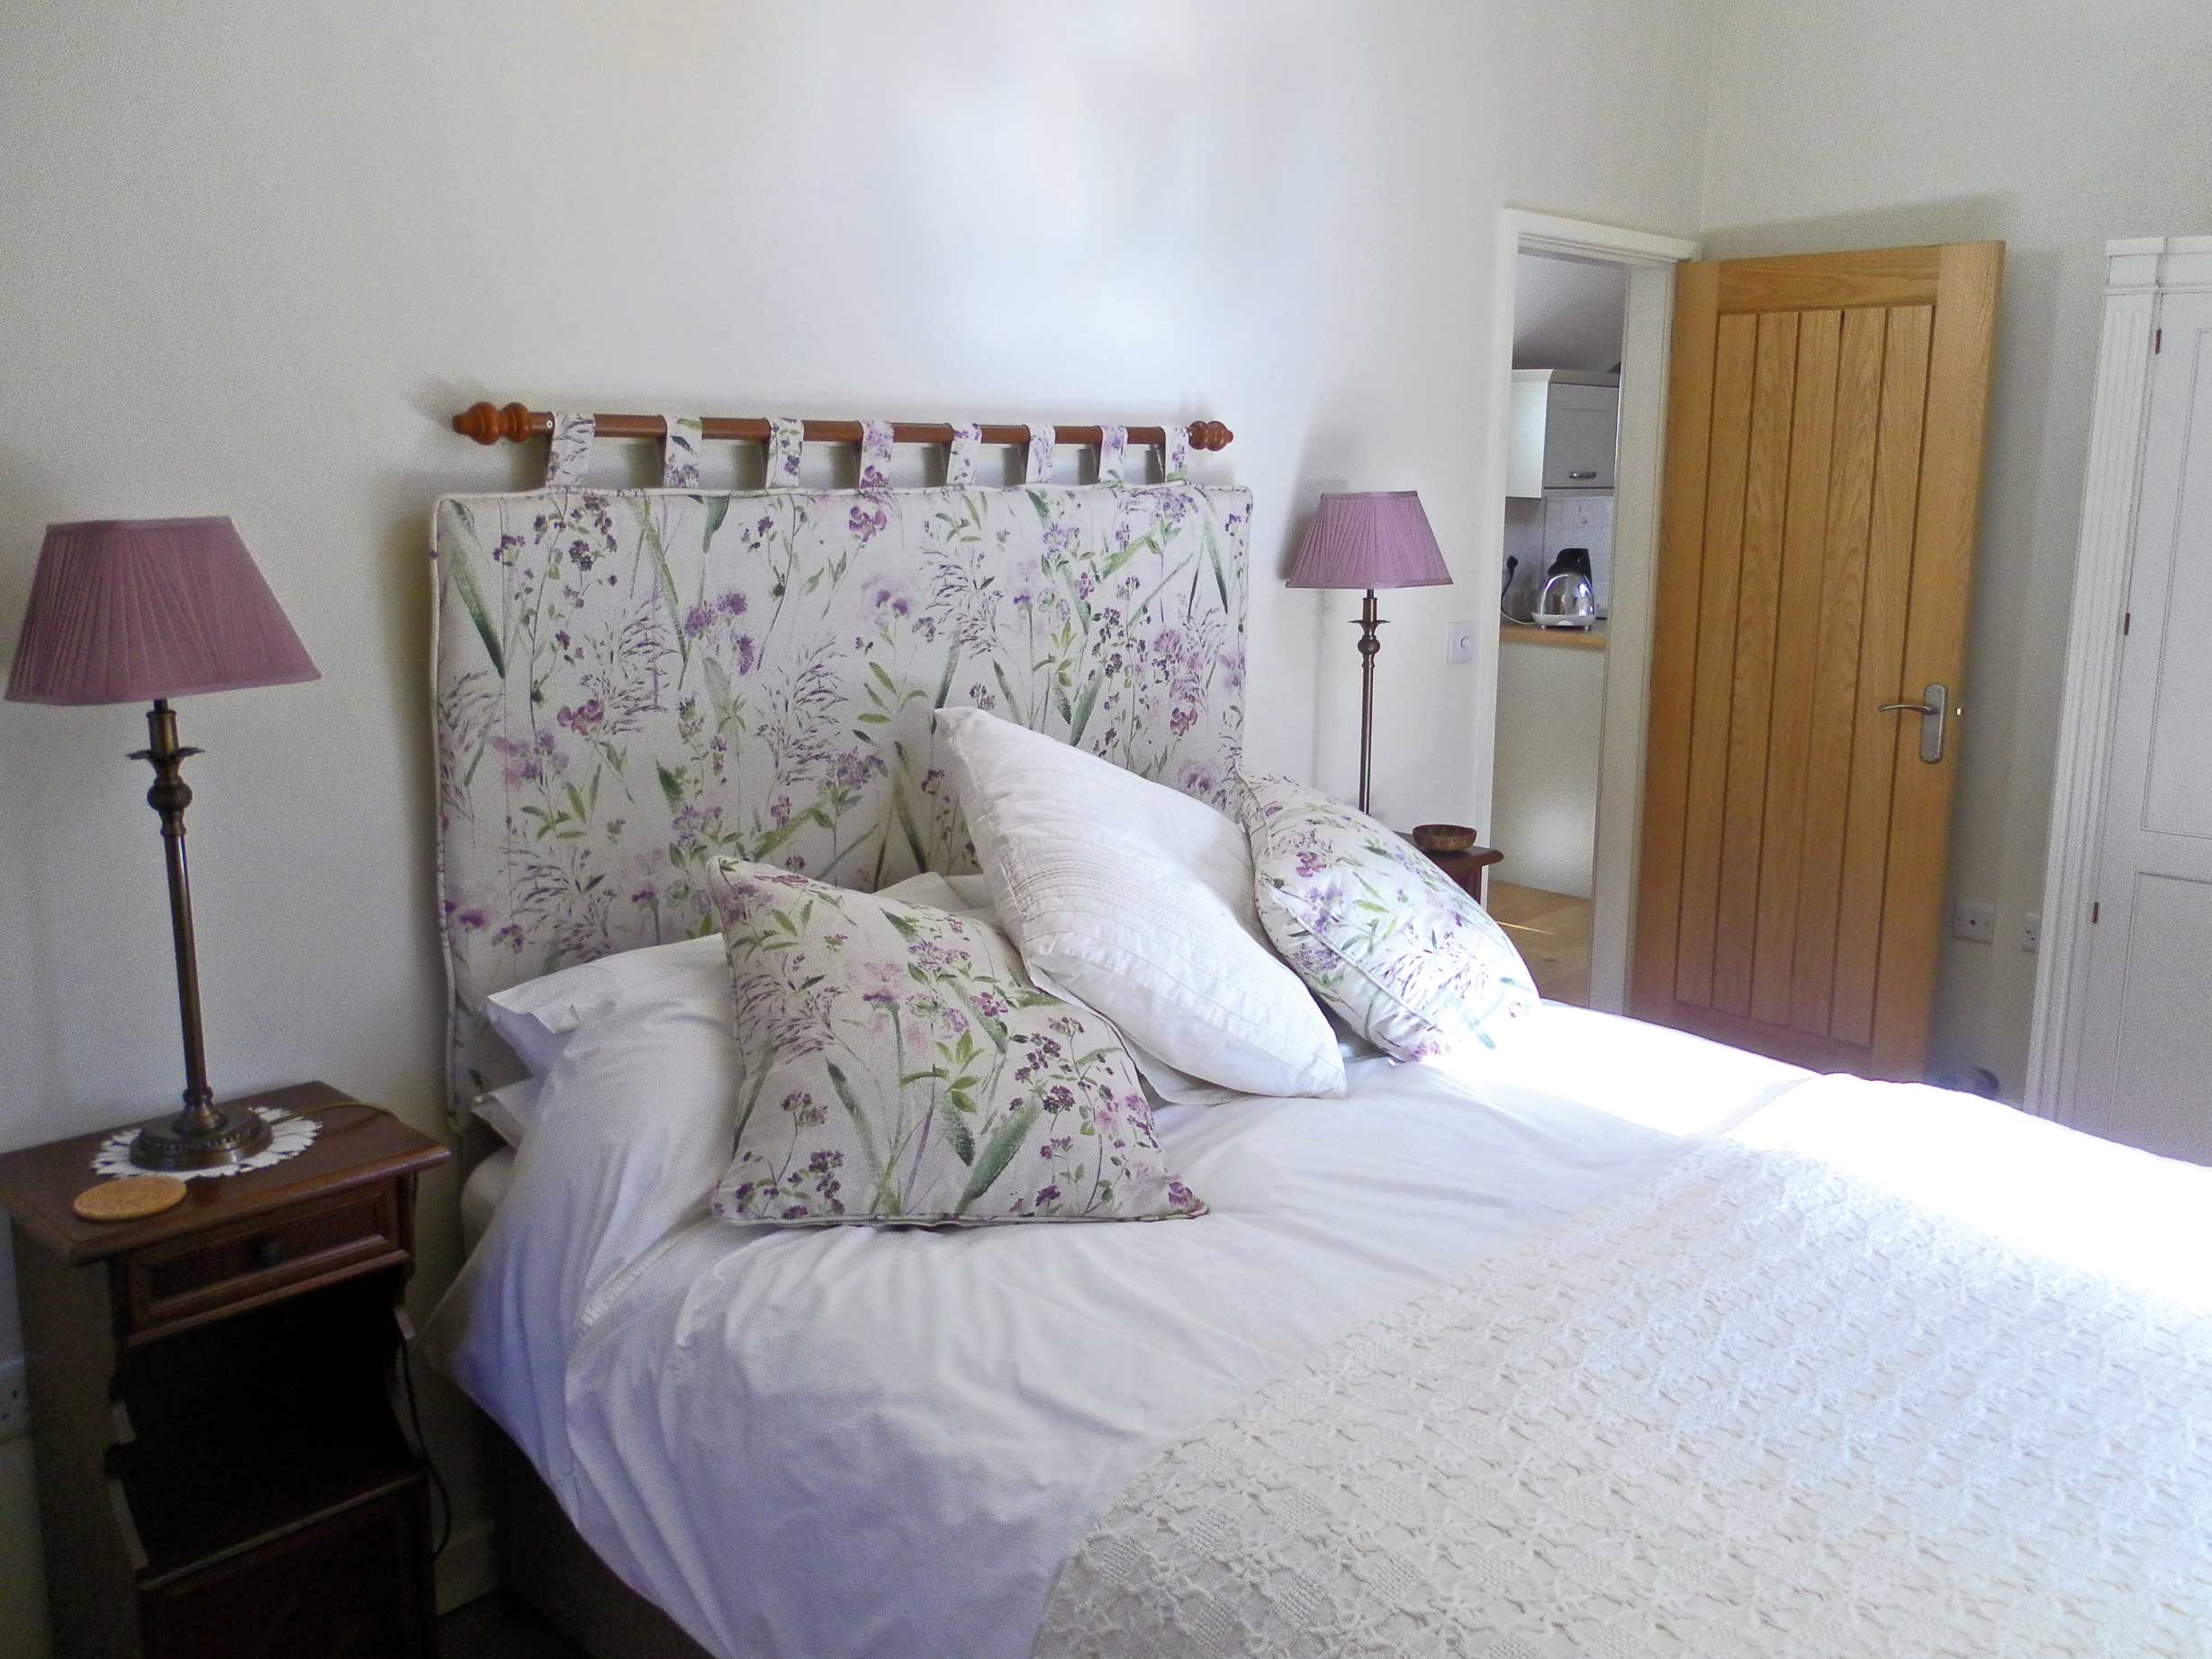 one bedroom holiday accommodation in rural Nottinghamshire